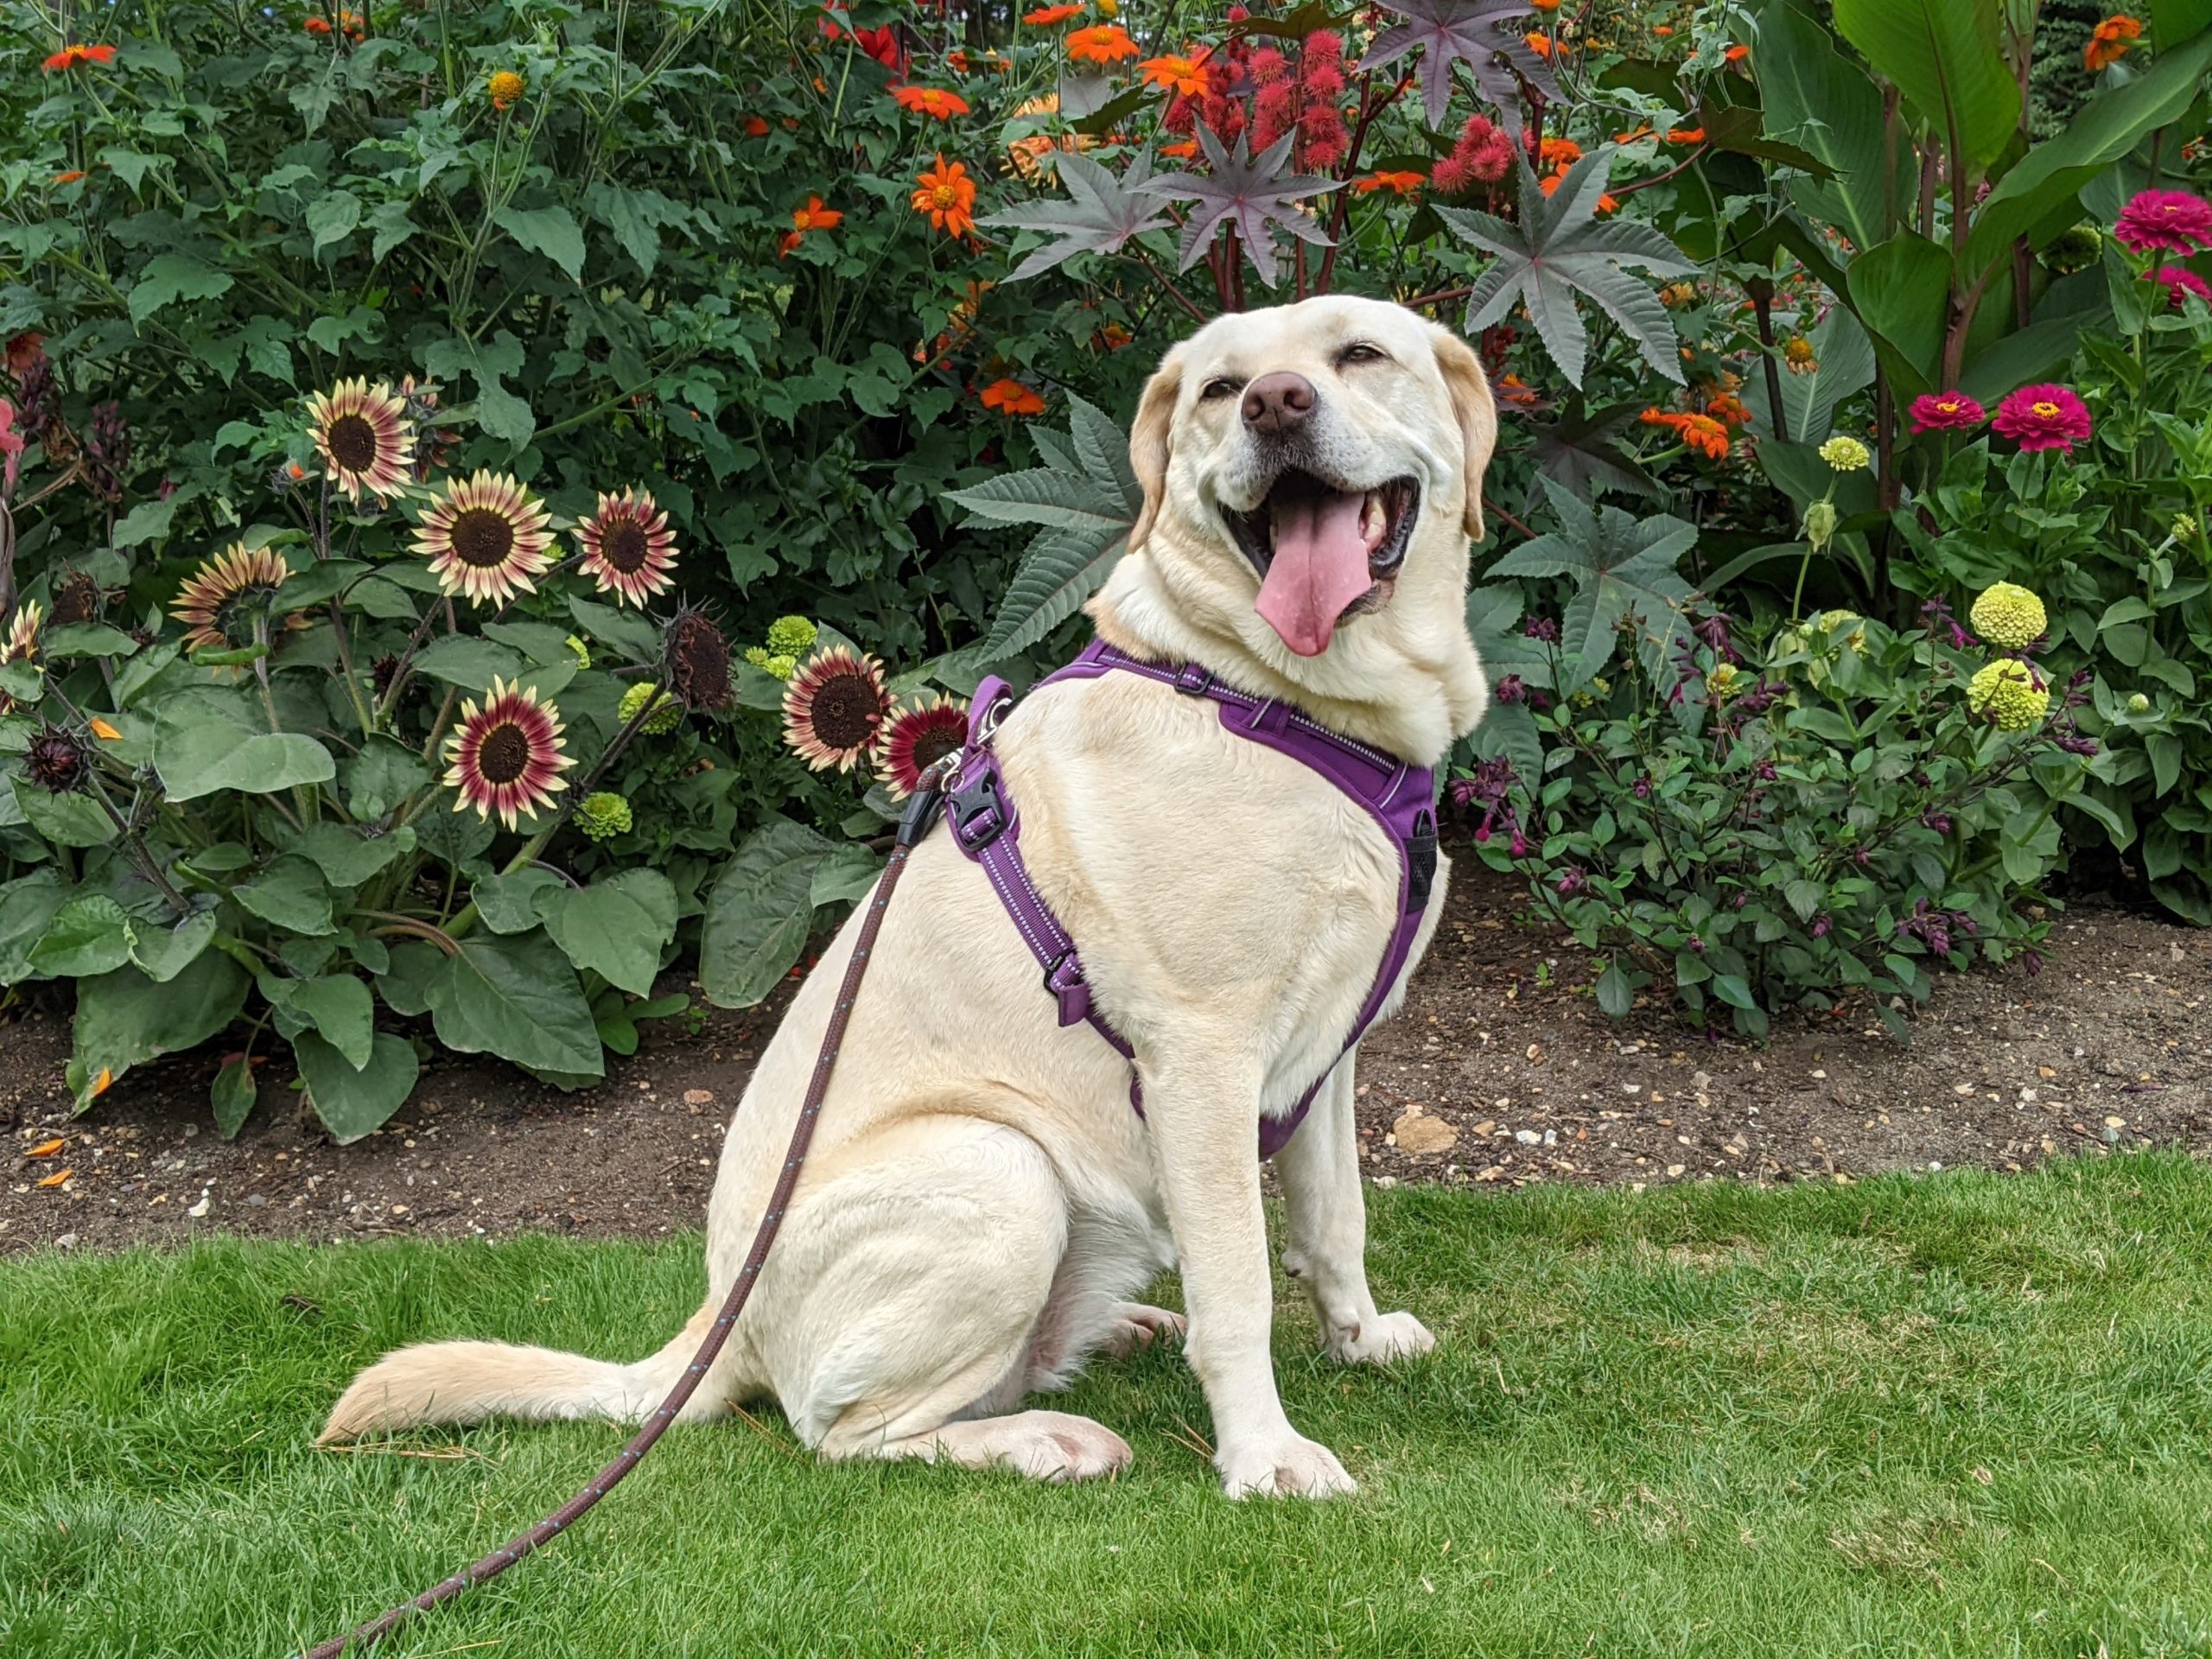 Labrador dog sat in front of sunflowers and other plants